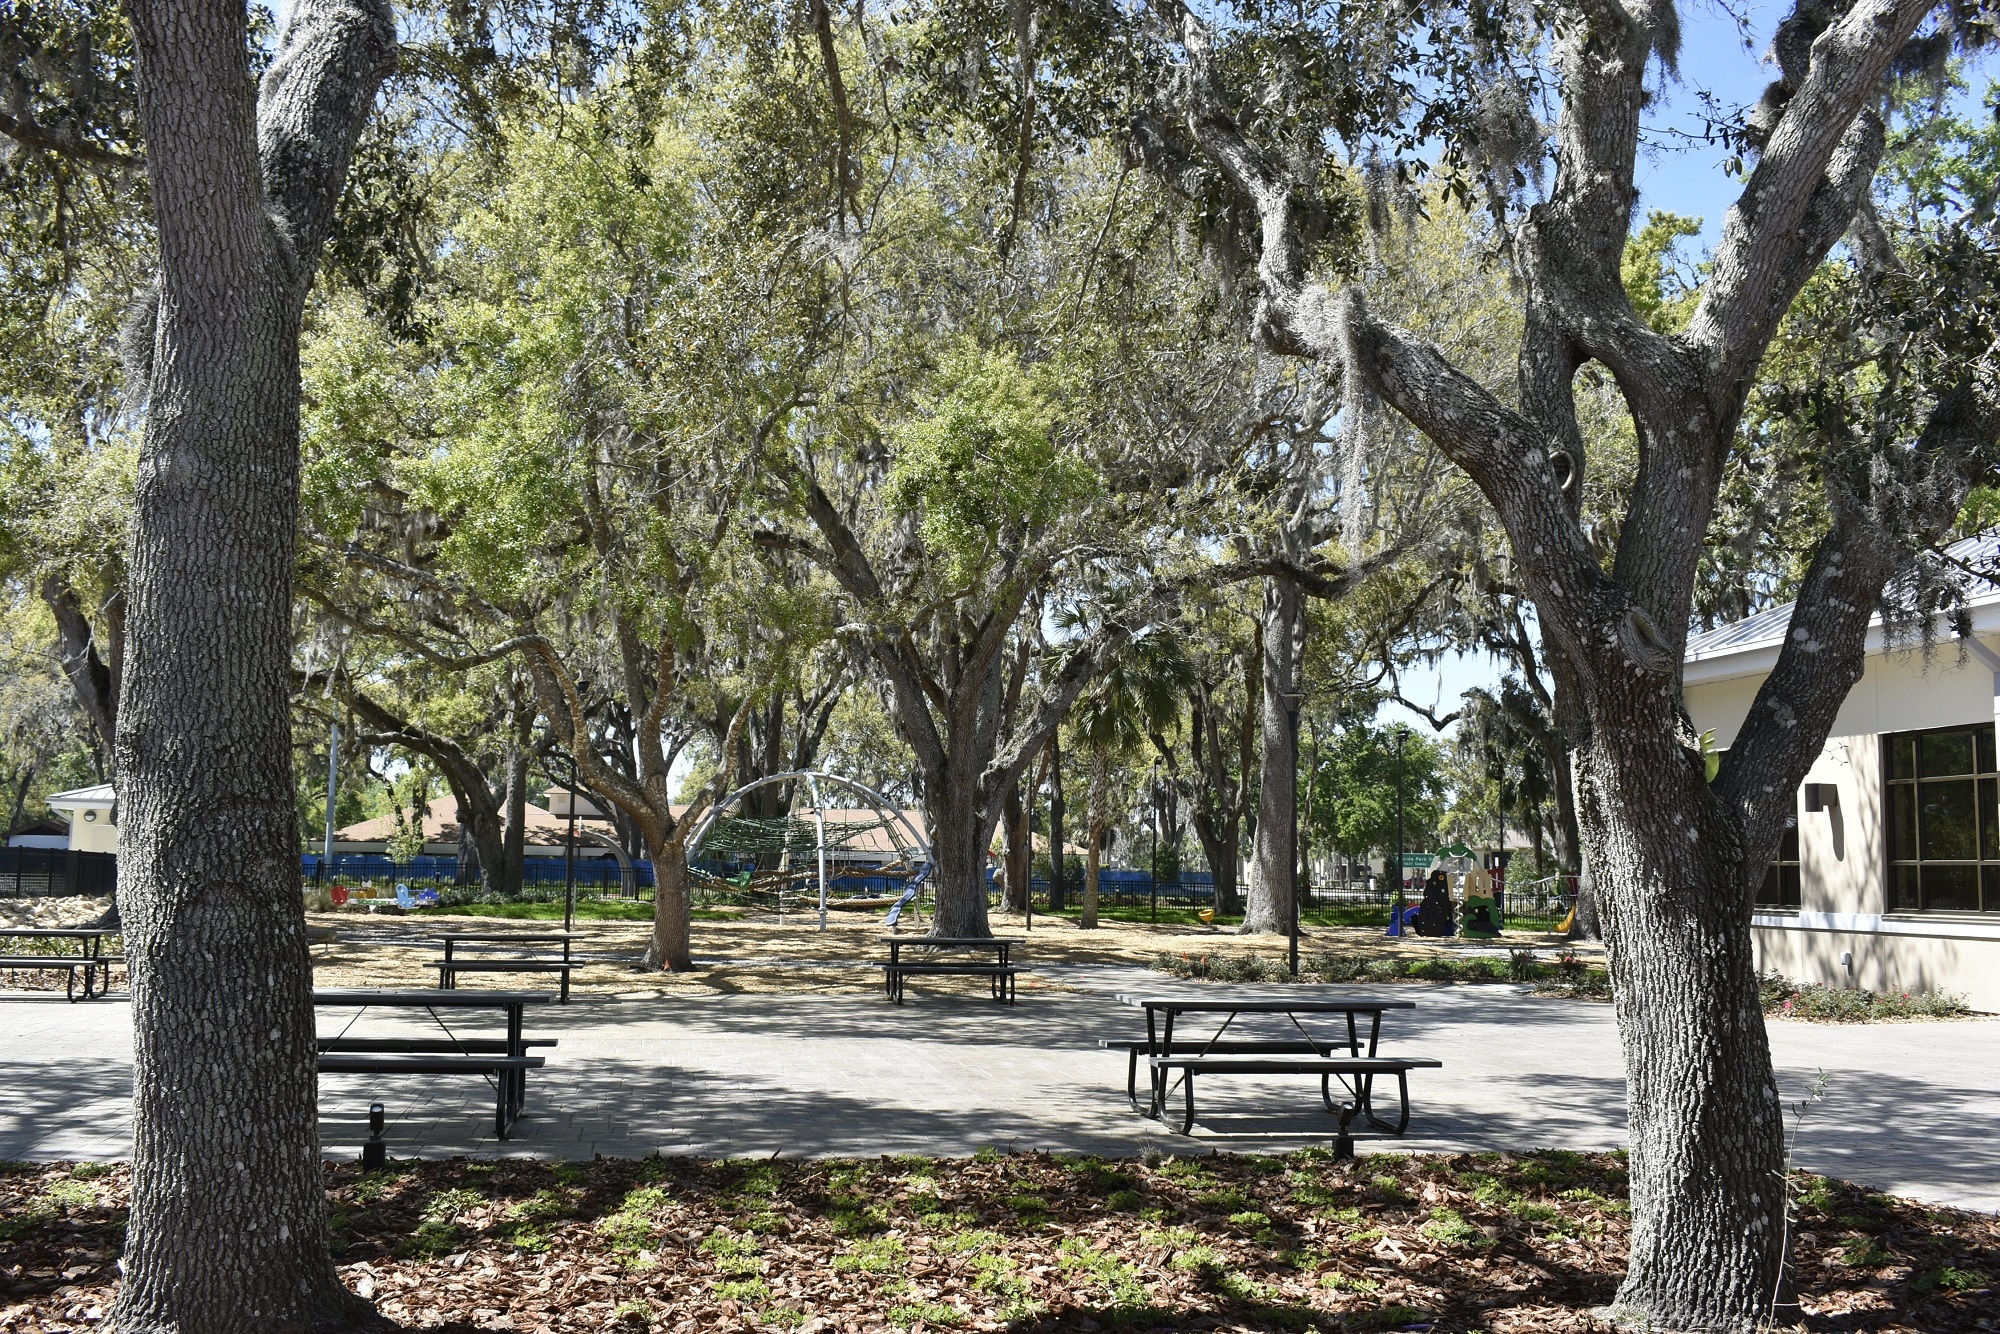 Historic oaks were preserved during construction of the playground at the Palm Coast Community Center. Courtesy photo